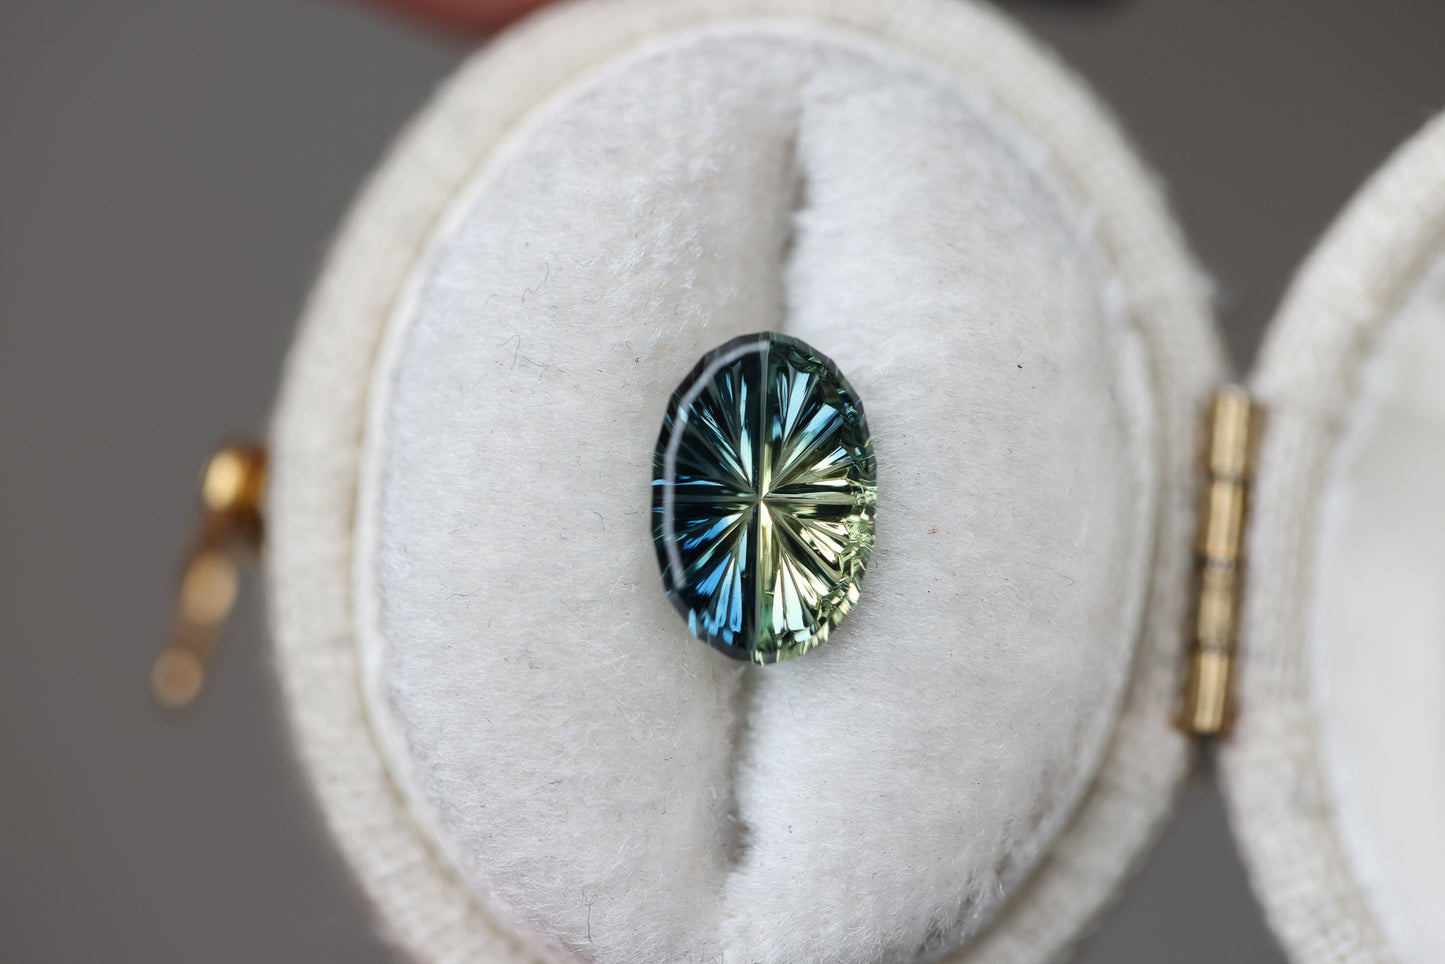 Load image into Gallery viewer, 1.93 oval parti sapphire - Starbrite cut by John Dyer
